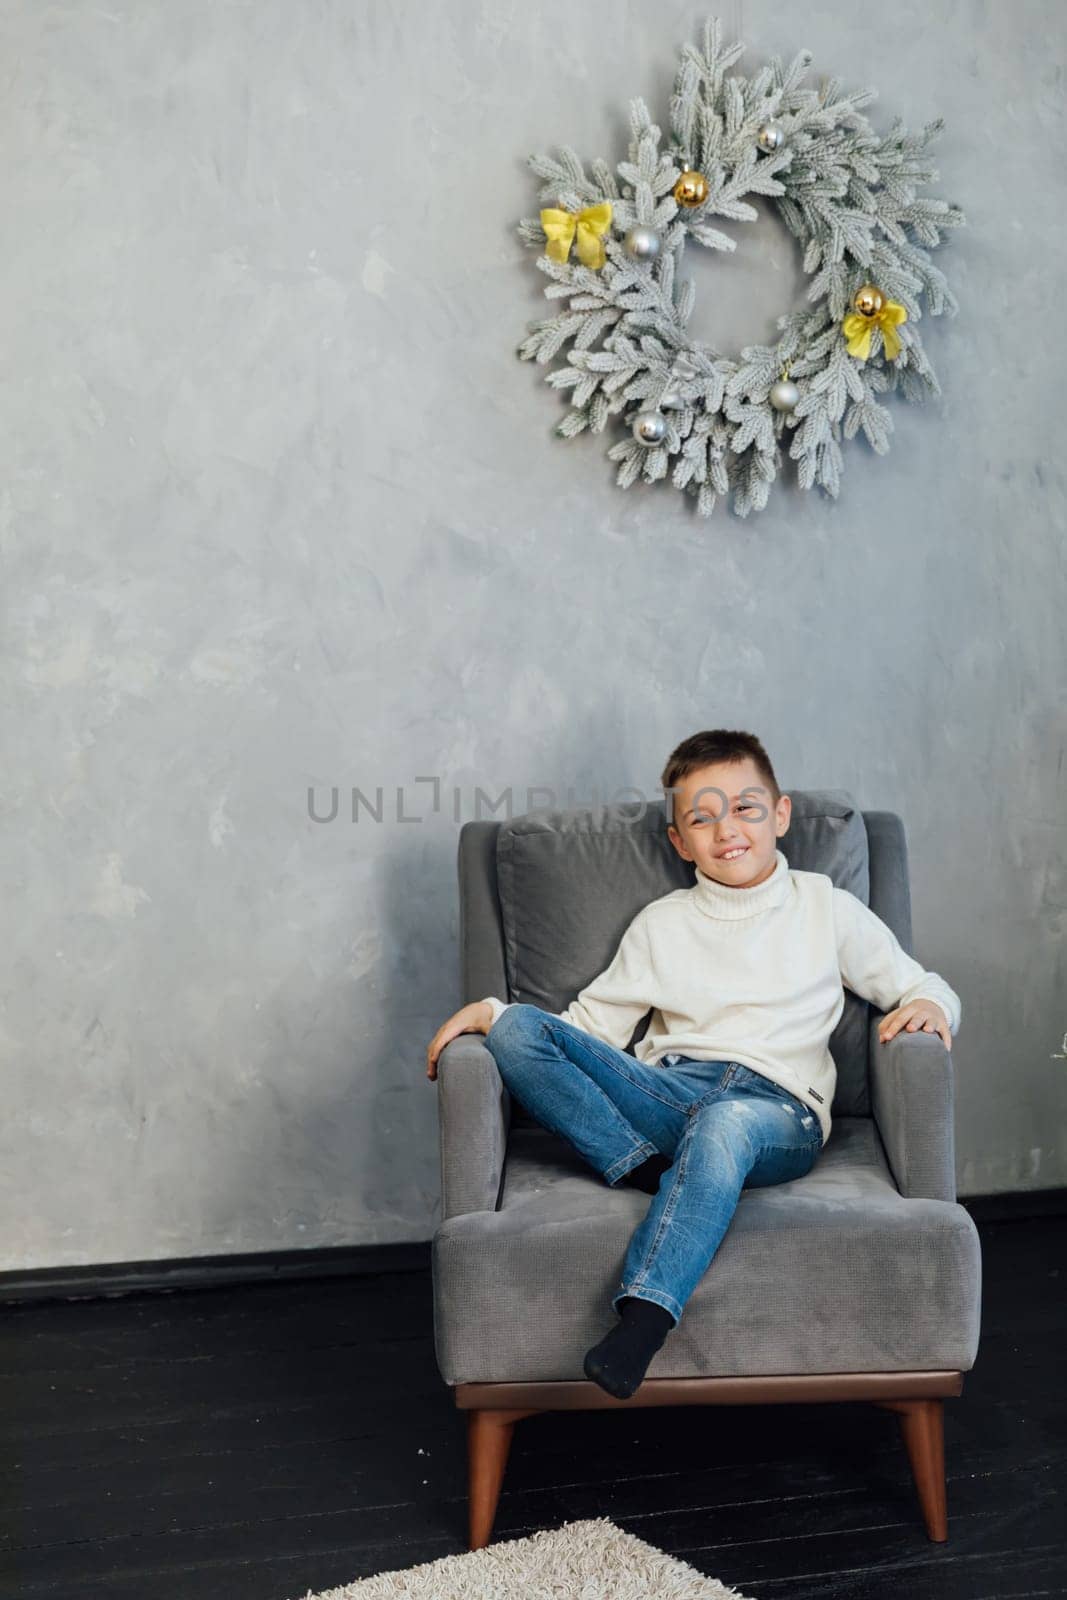 Boy sitting in armchair at christmas wreath for new year by Simakov